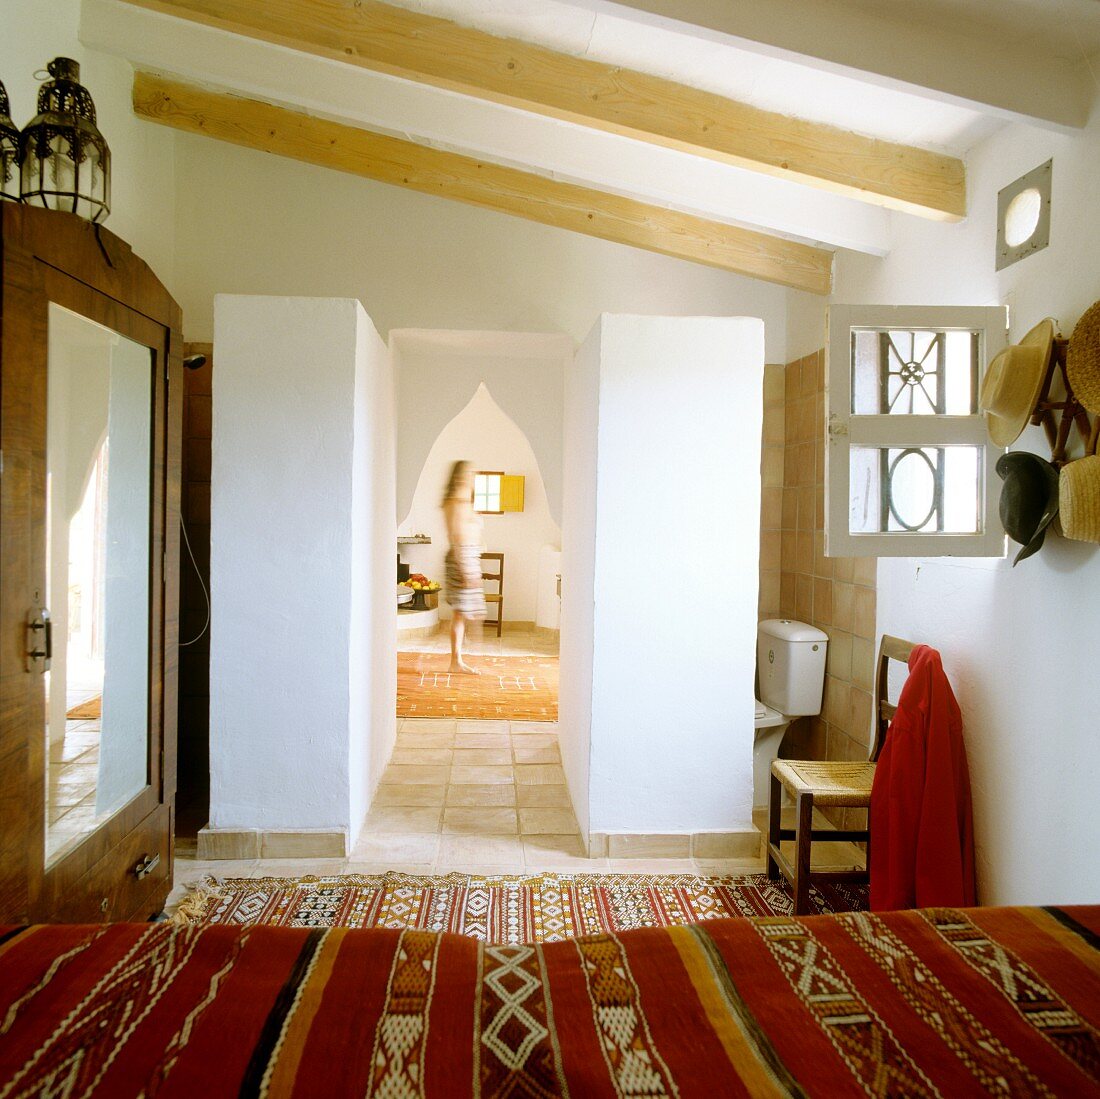 View across bed with ethnic bedspread to Oriental pointed archway and woman in hall